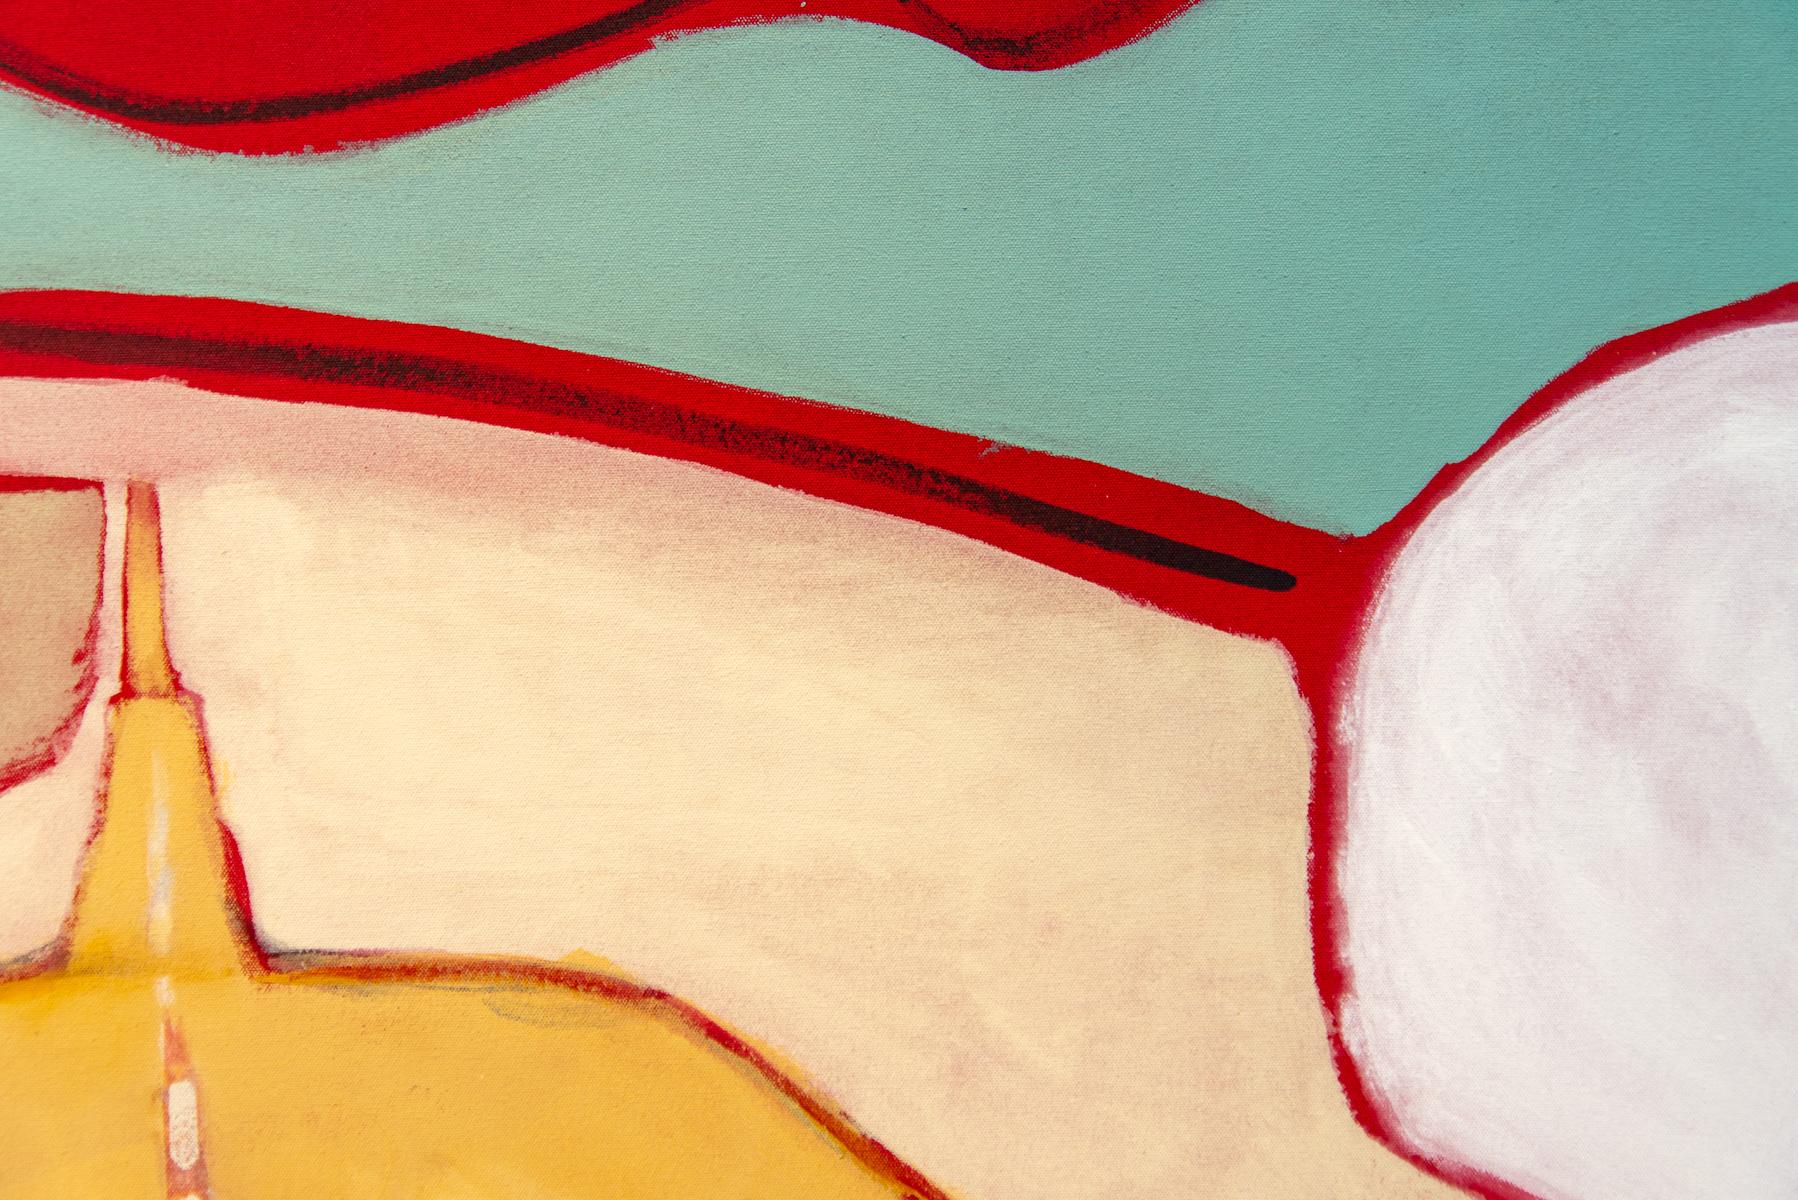 Big Red Trip - large, bright, colorful, abstracted landscape, acrylic on canvas For Sale 2